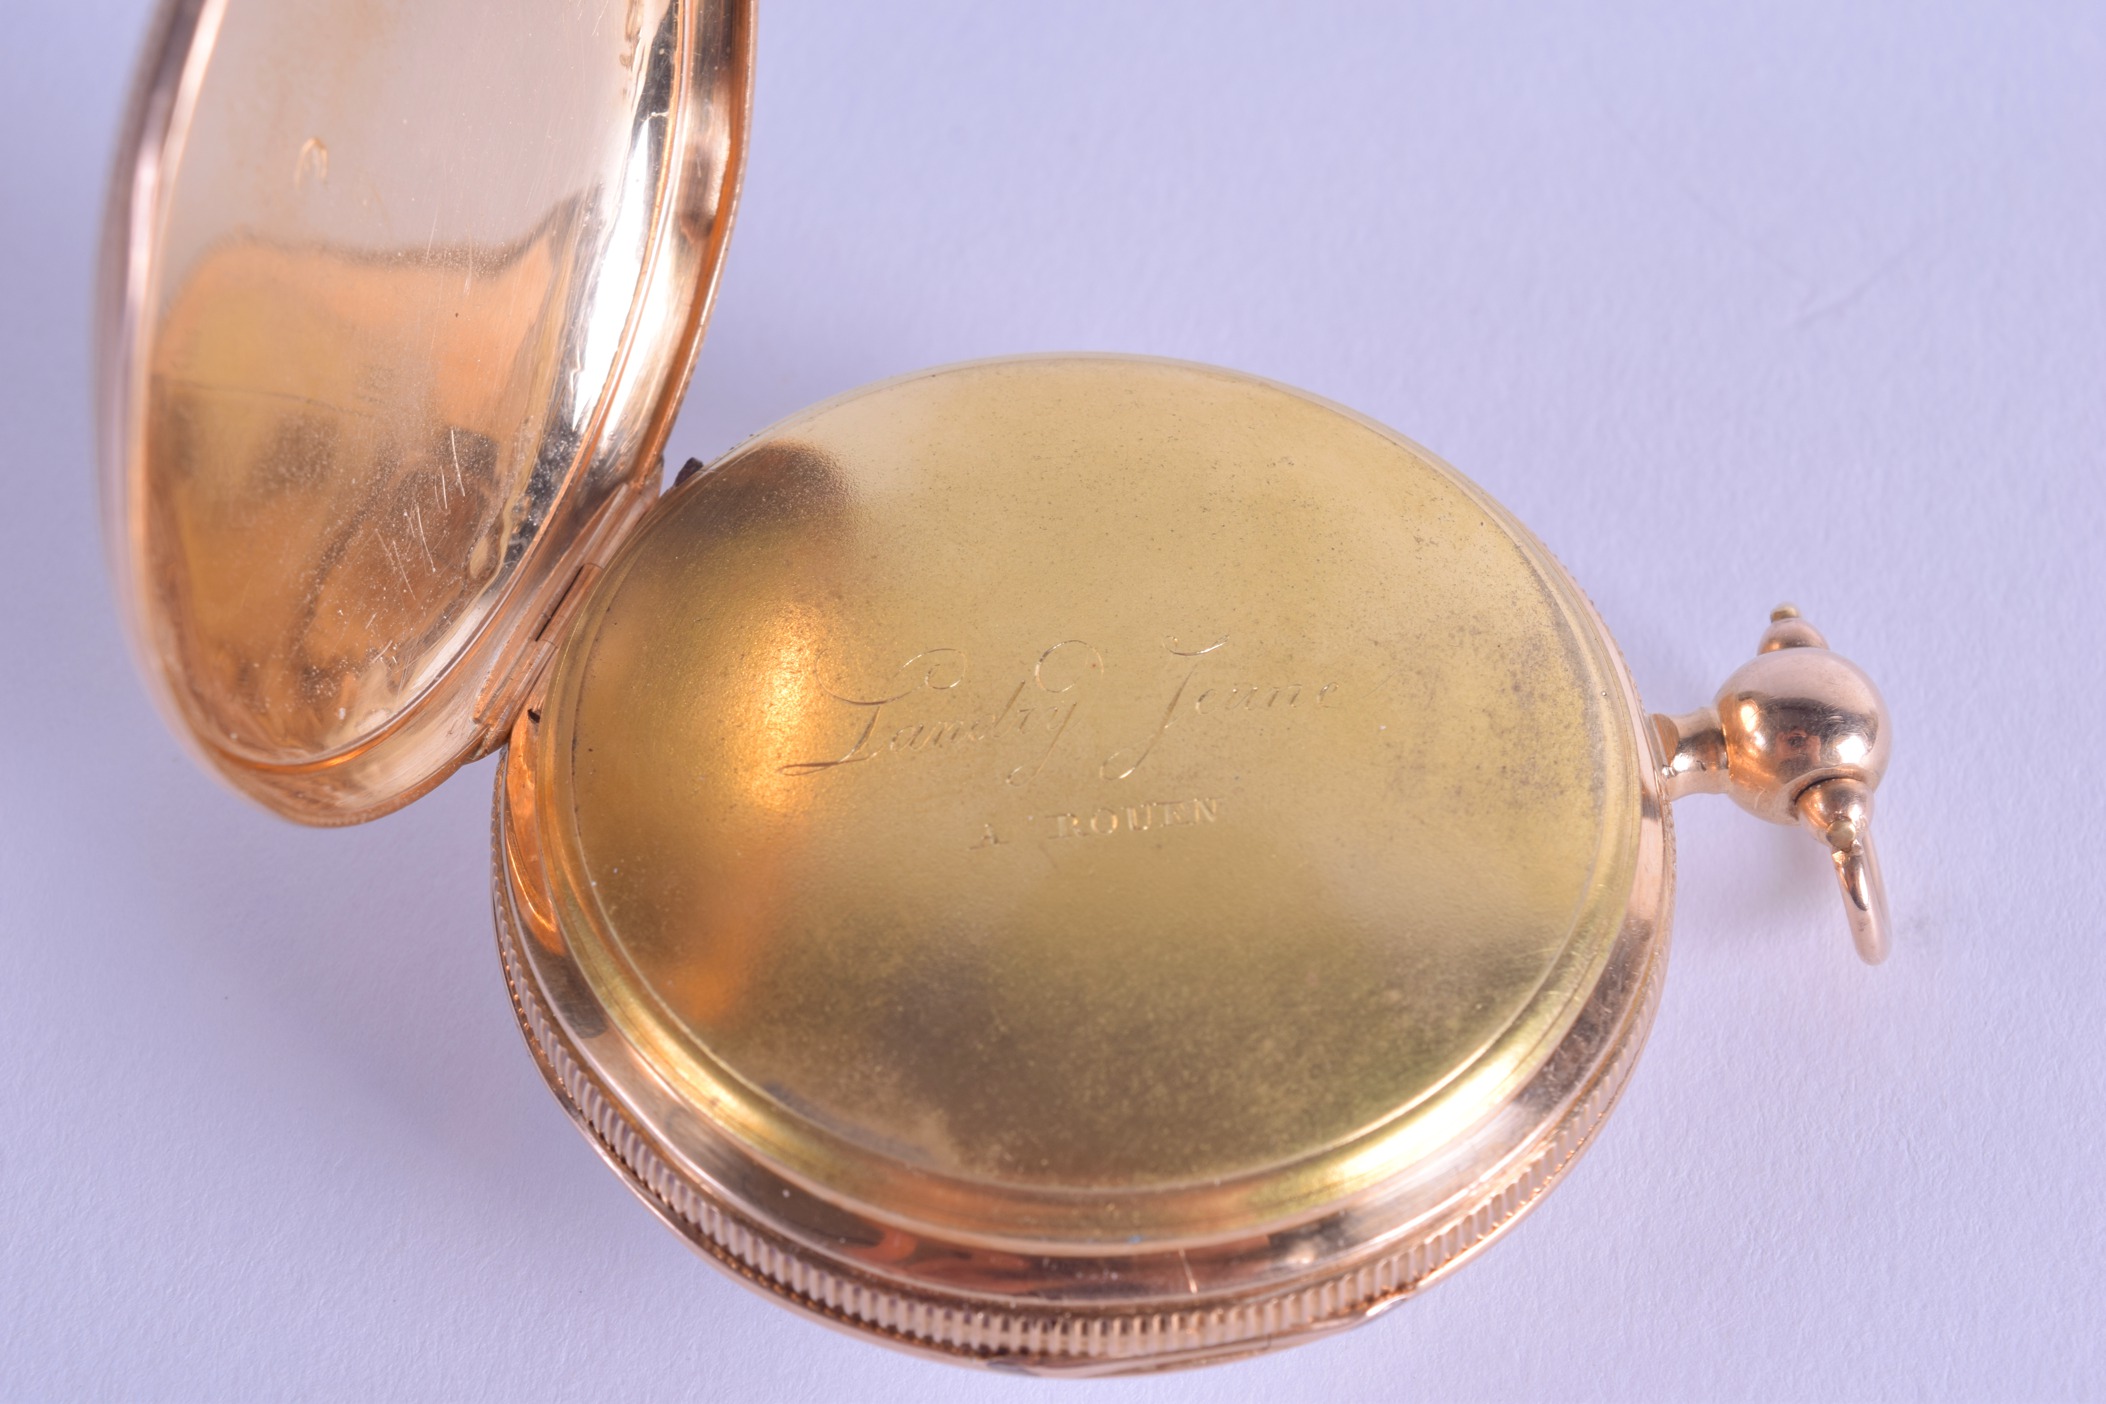 A MID 19TH CENTURY FRENCH 18CT GOLD POCKET WATCH with white enamel dial and black numerals. 109.4 - Image 2 of 3